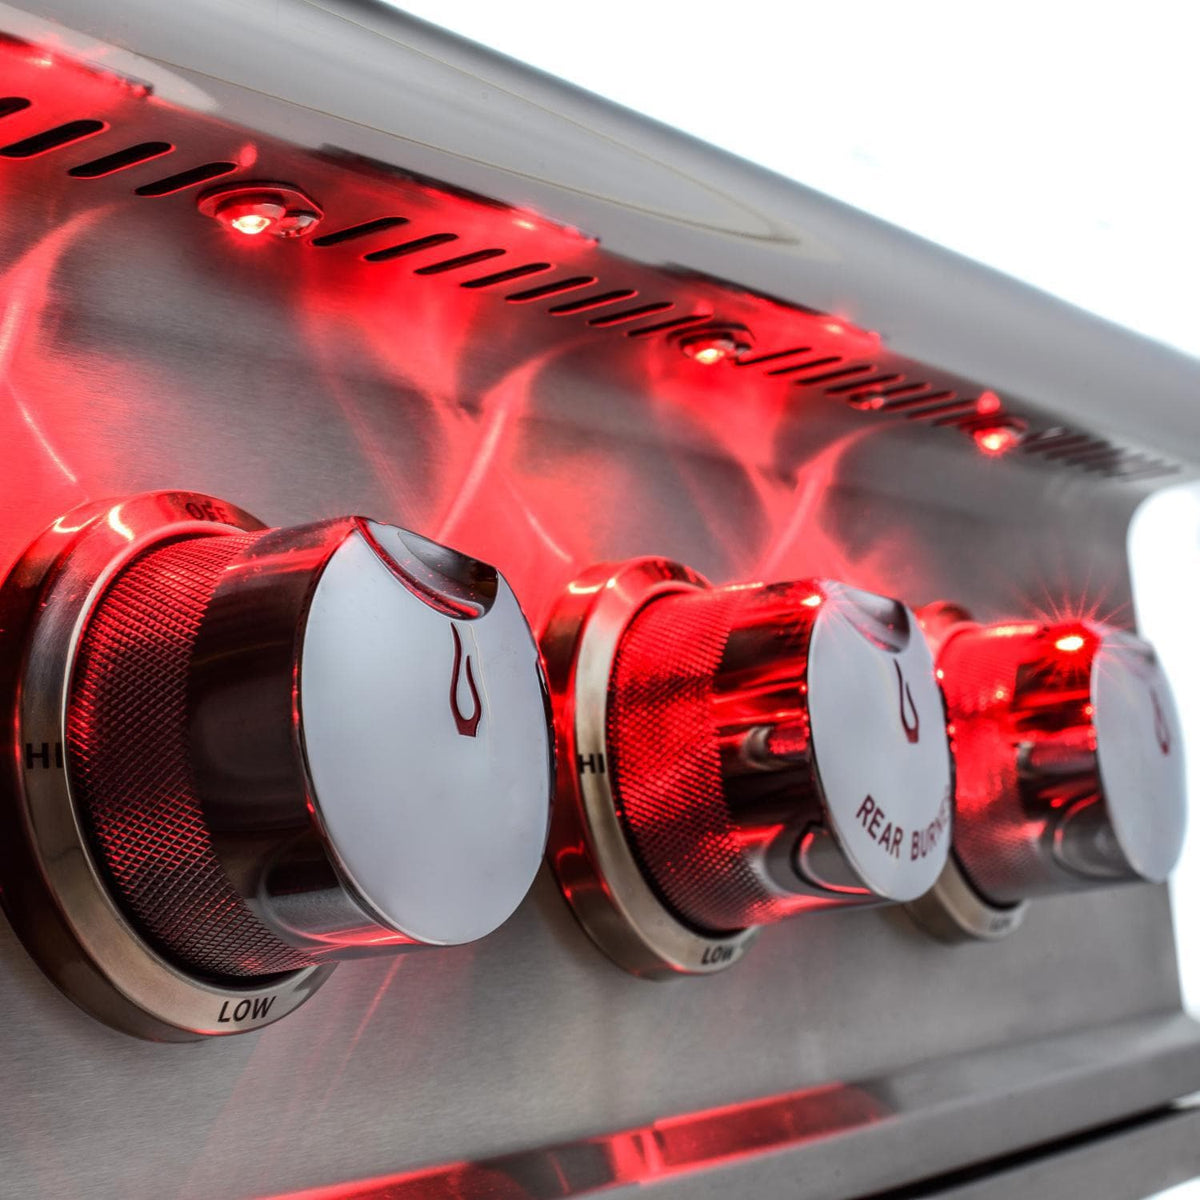 Blaze Professional 4 Burner 44 Inch Grill with Red LED Illuminated Knobs